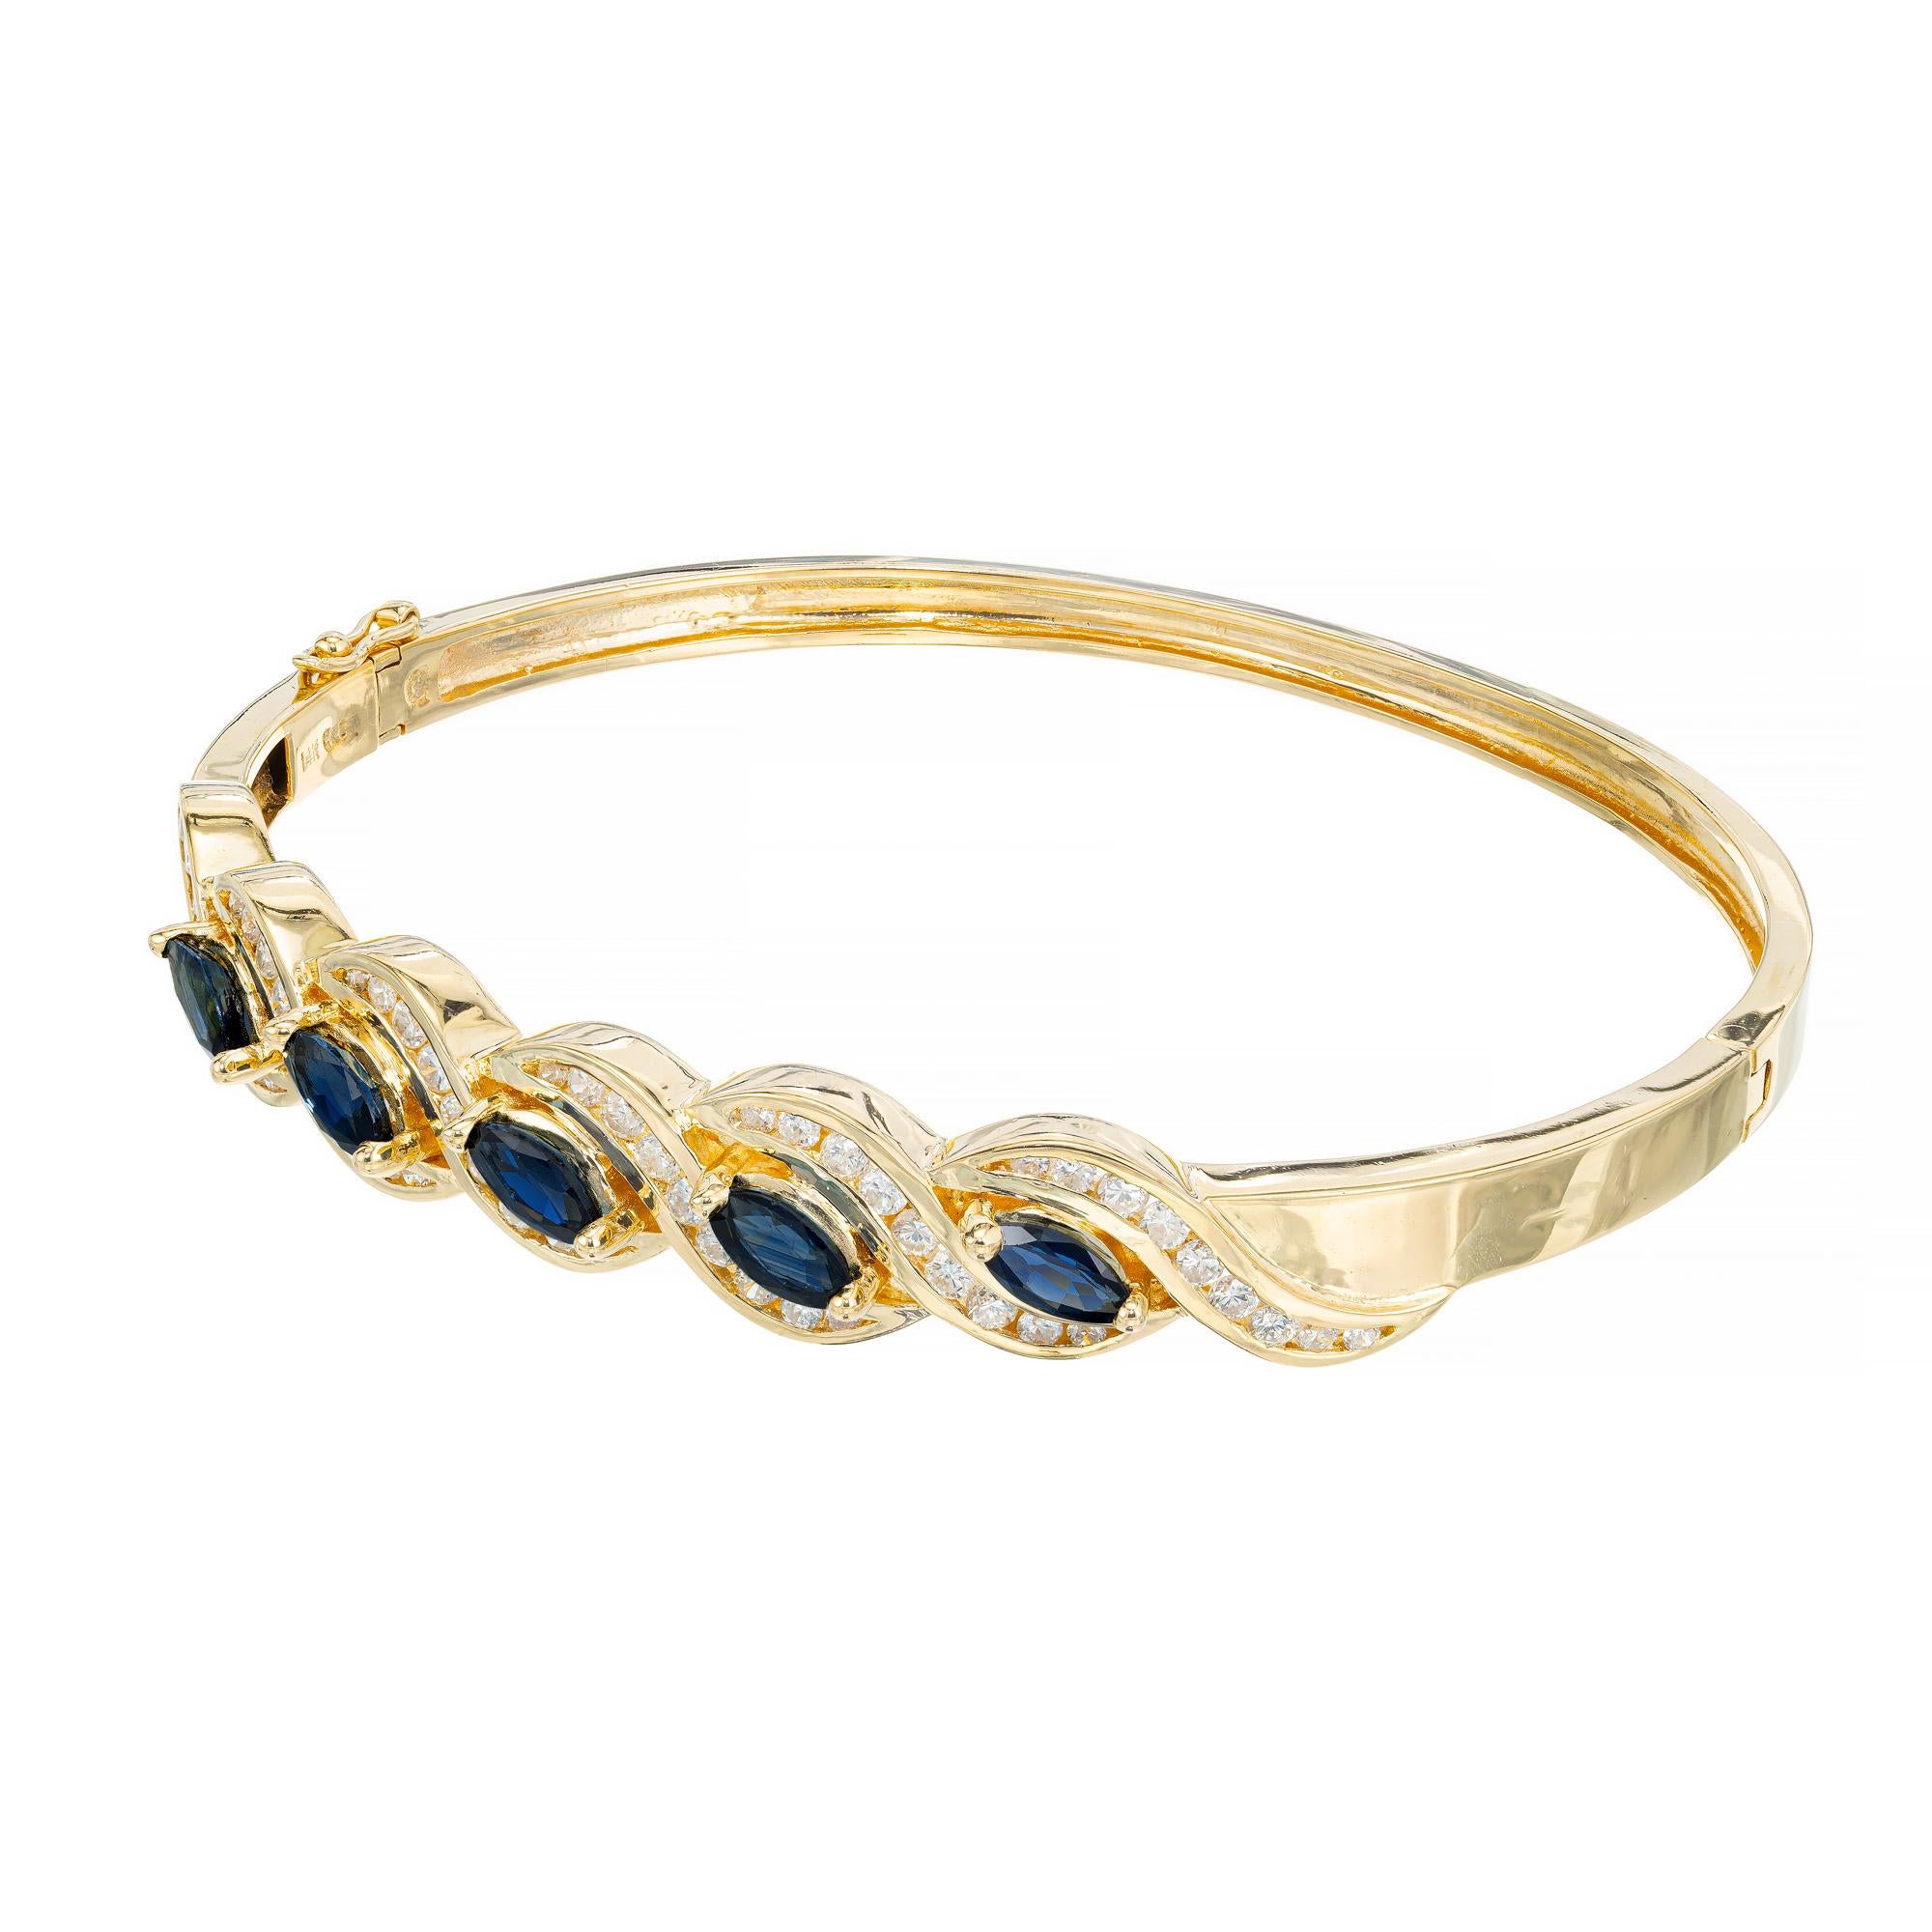 Sapphire and diamond bangle bracelet. 5 marquise slant set sapphires totaling 1.75cts are mounted in a 14k yellow gold bracelet, with a swirl design halo of 54 round cut diamonds. This bangle is hinged with a figure 8 safety clasp. 

5 marquise blue